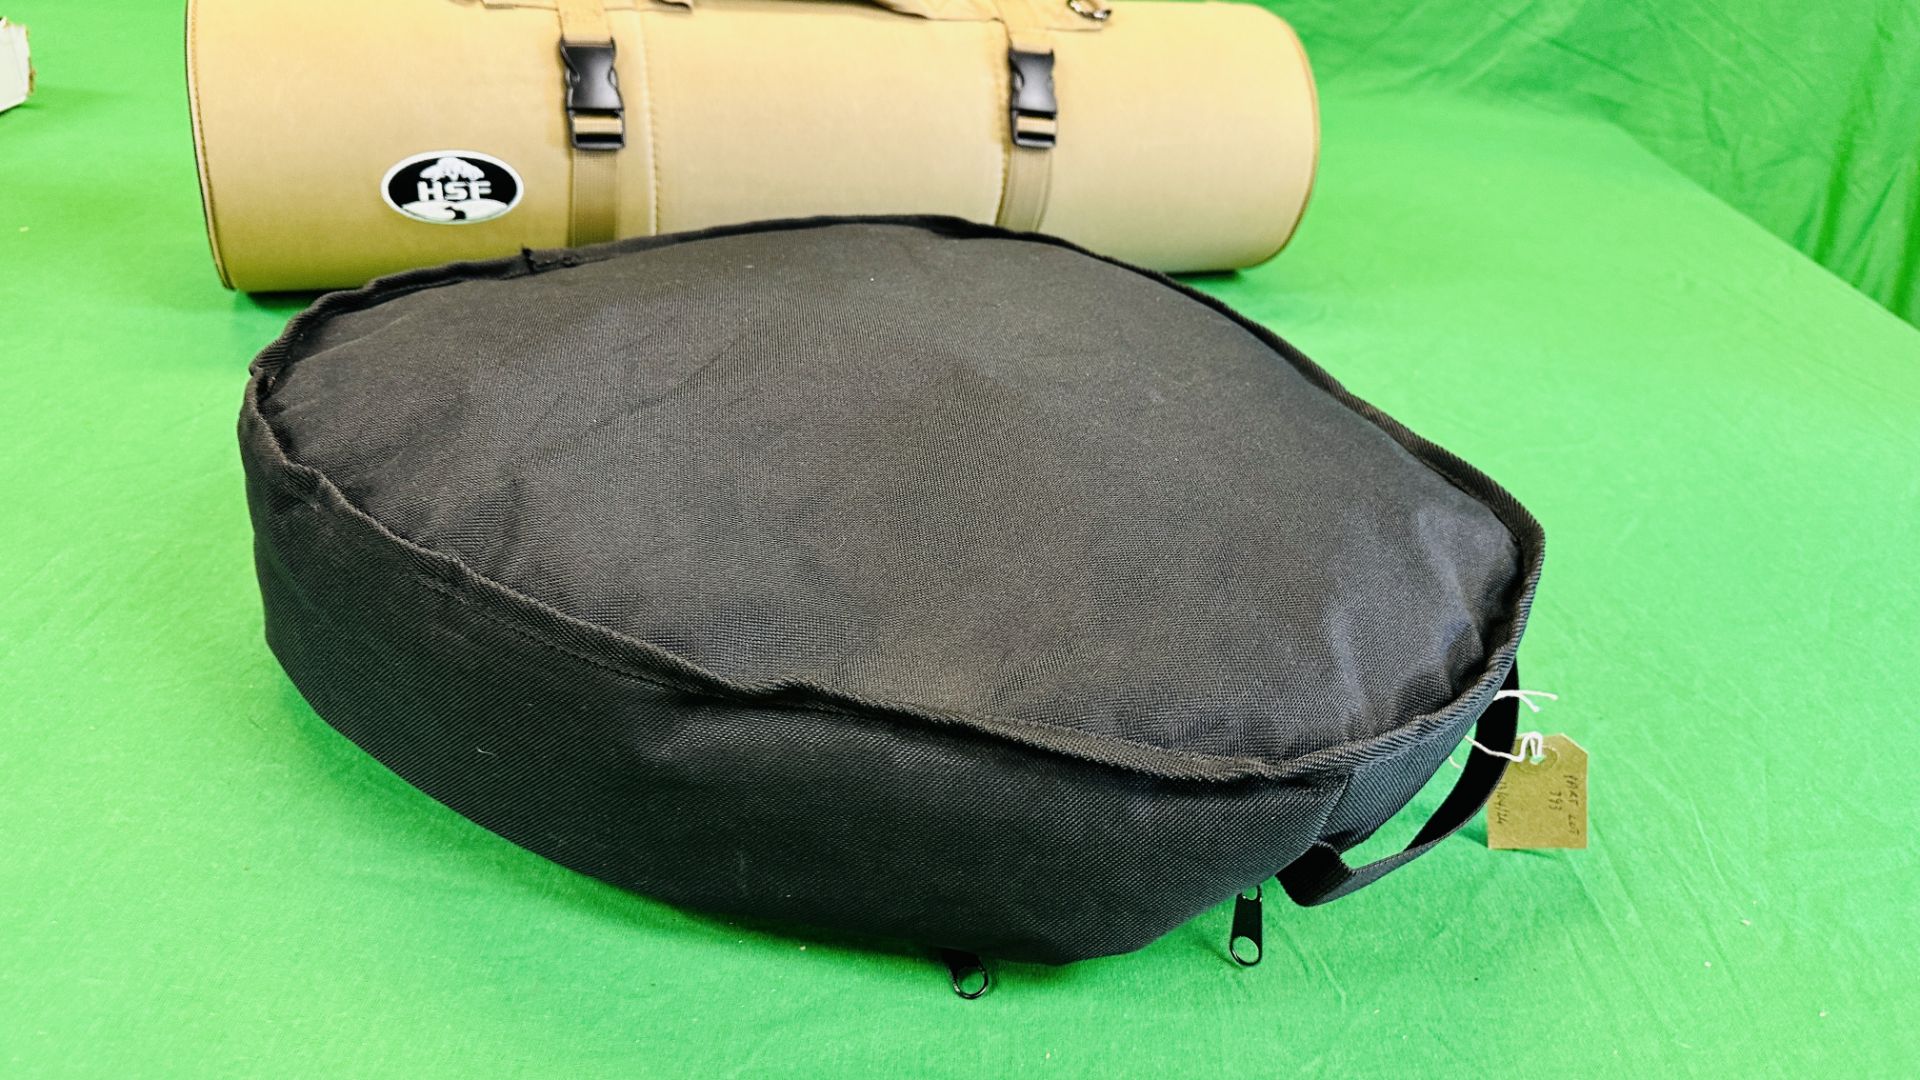 A BLACK CANVAS SHOOTING CUSHION ALONG WITH A GREEN ROLL OUT SHOOTING MAT. - Image 5 of 10